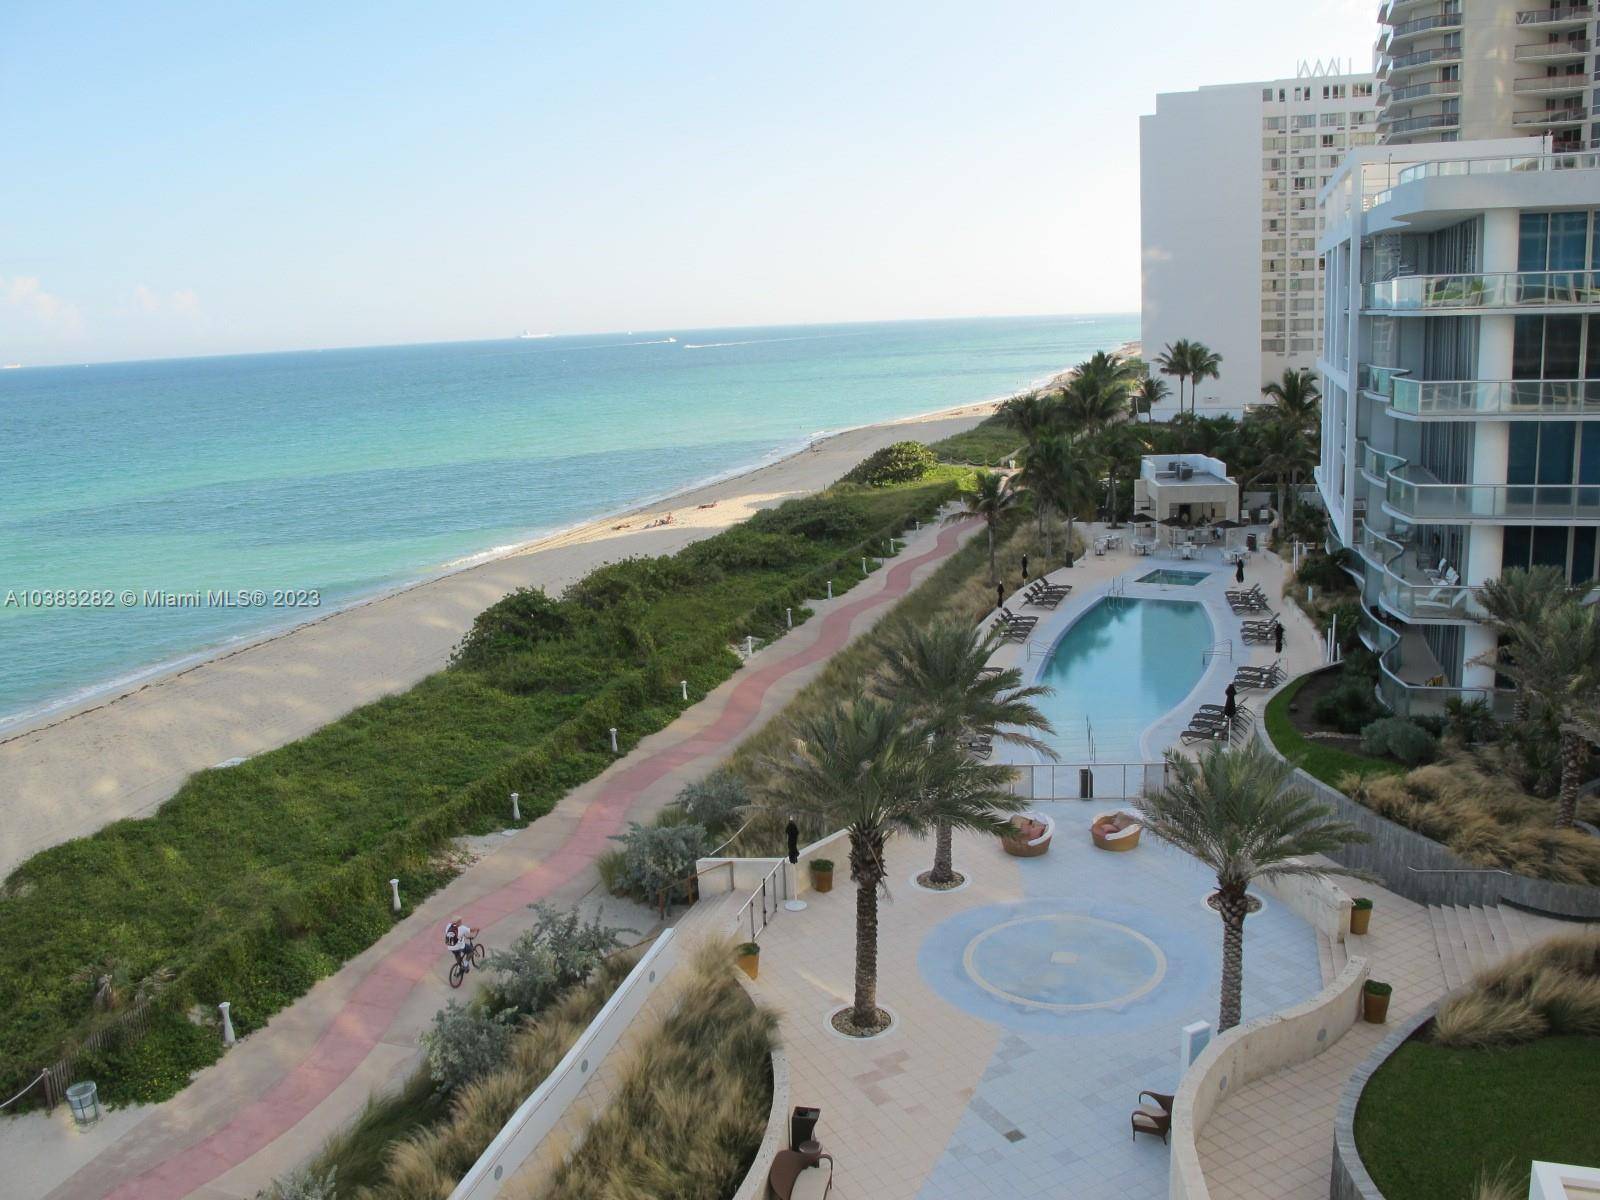 2bed 2bath beautiful apartment on the beach in one of the best hotels in the USA.